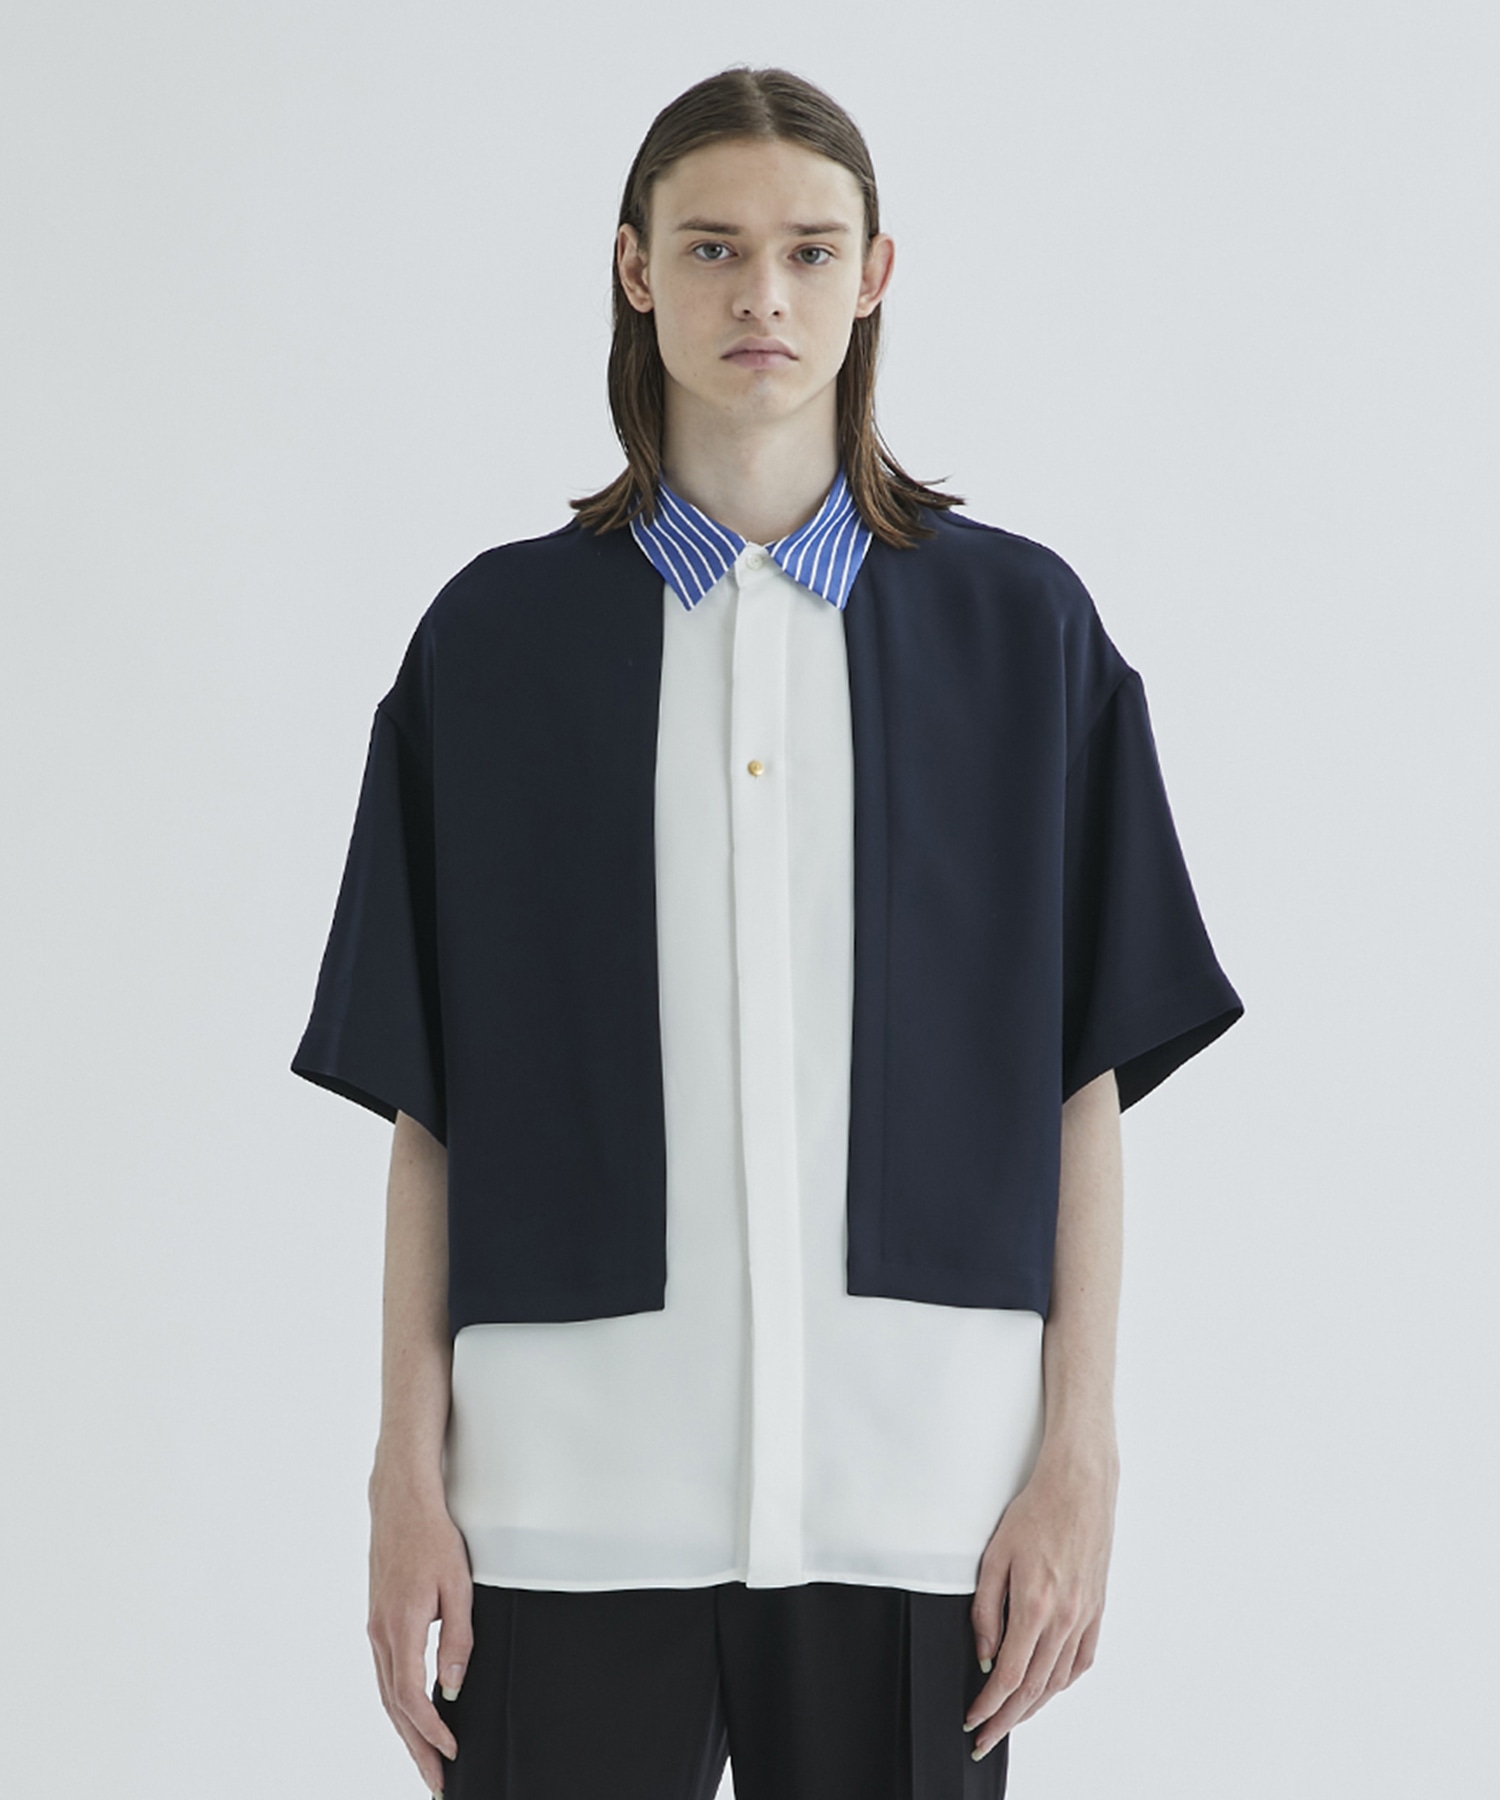 Y/Project Oversize Layered Shirts-www.pictureitsolved.com